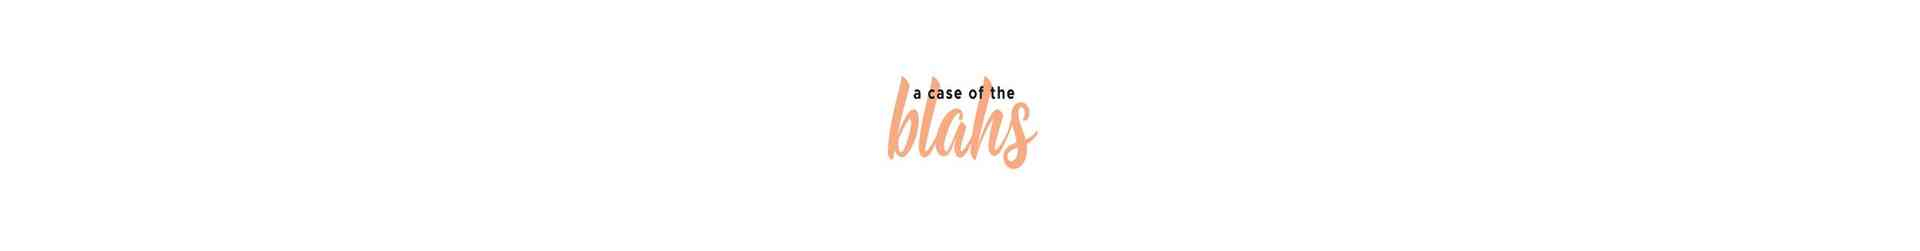 A CASE OF THE BLAHS